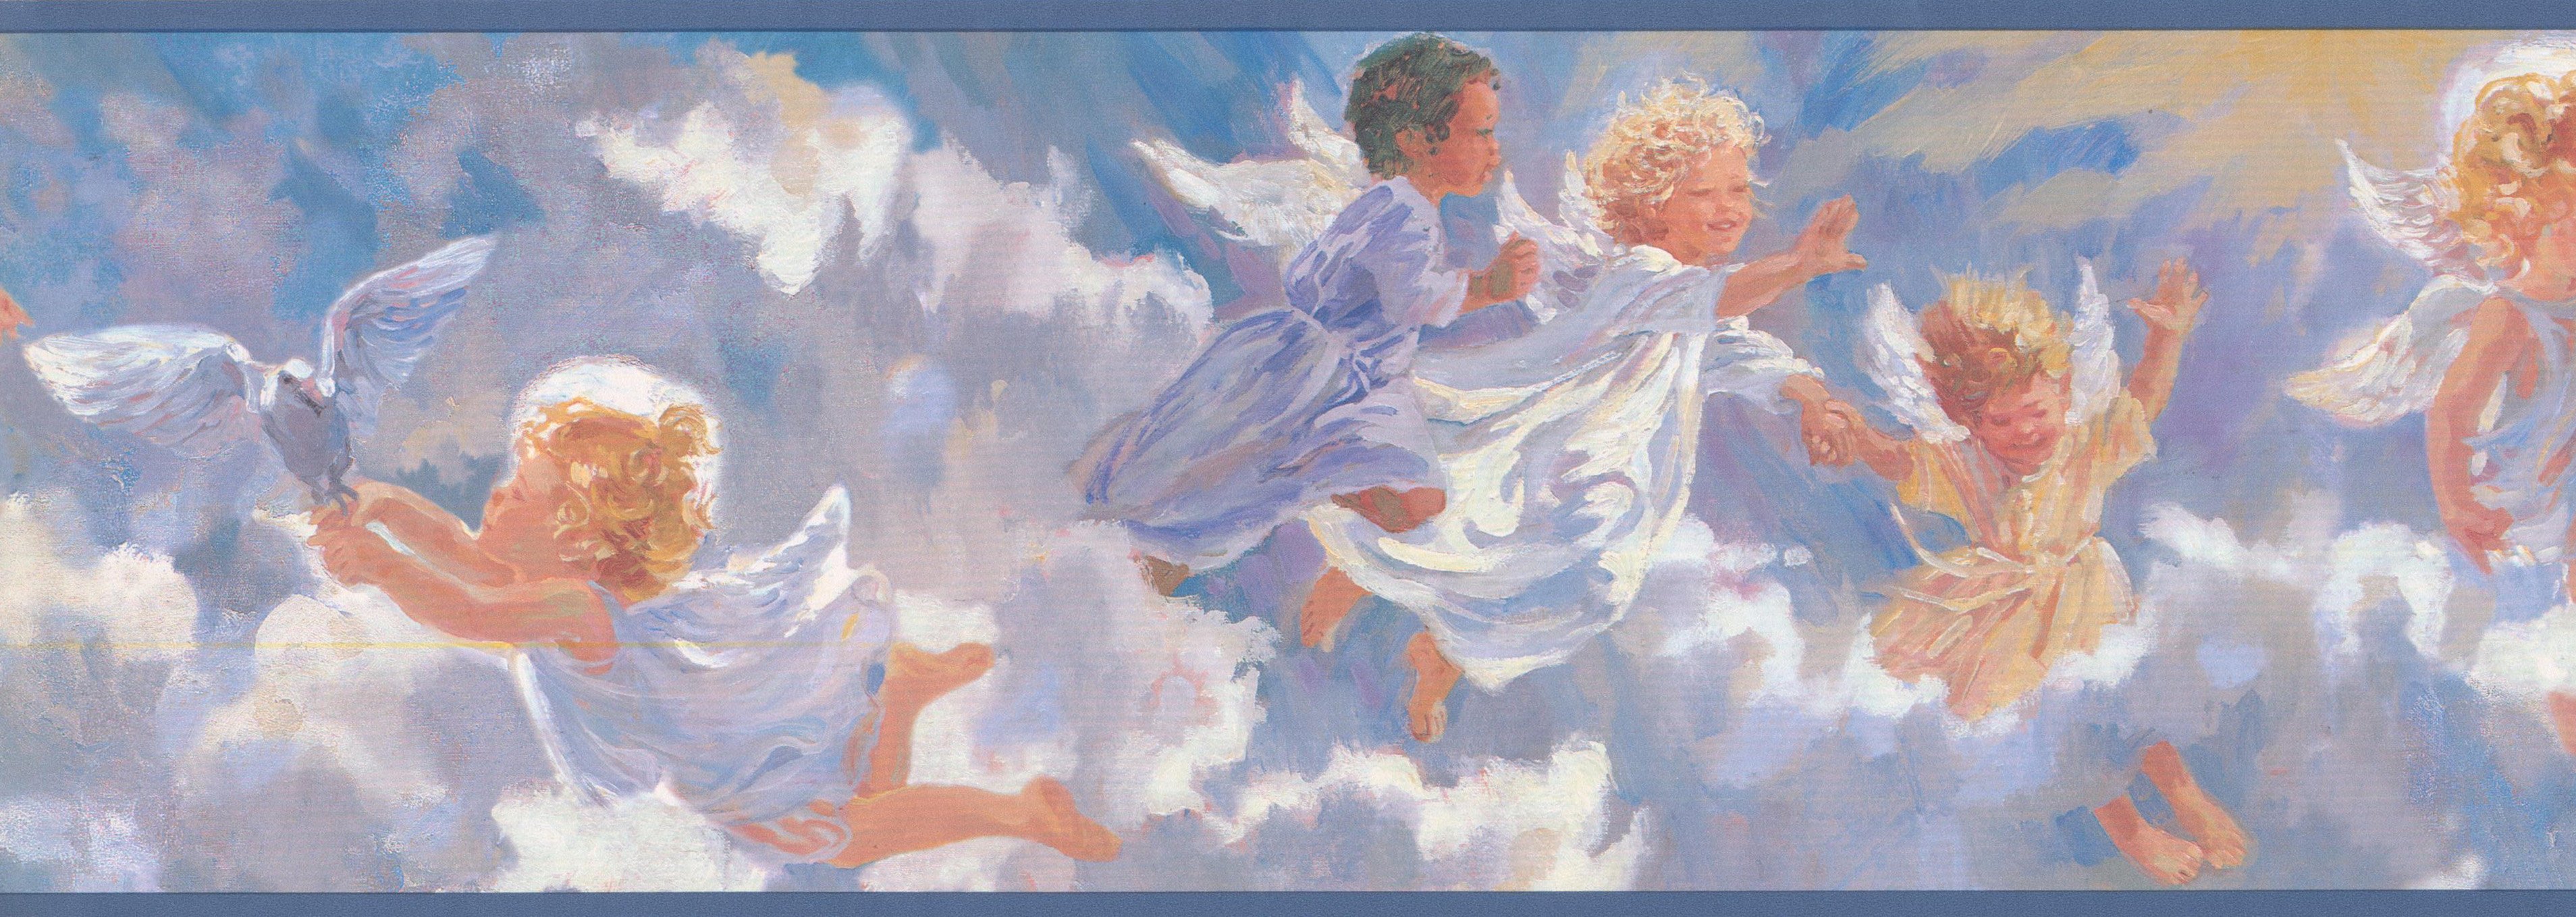 Wallpaper Border Angels Flying in the Sky Wall Border Retro